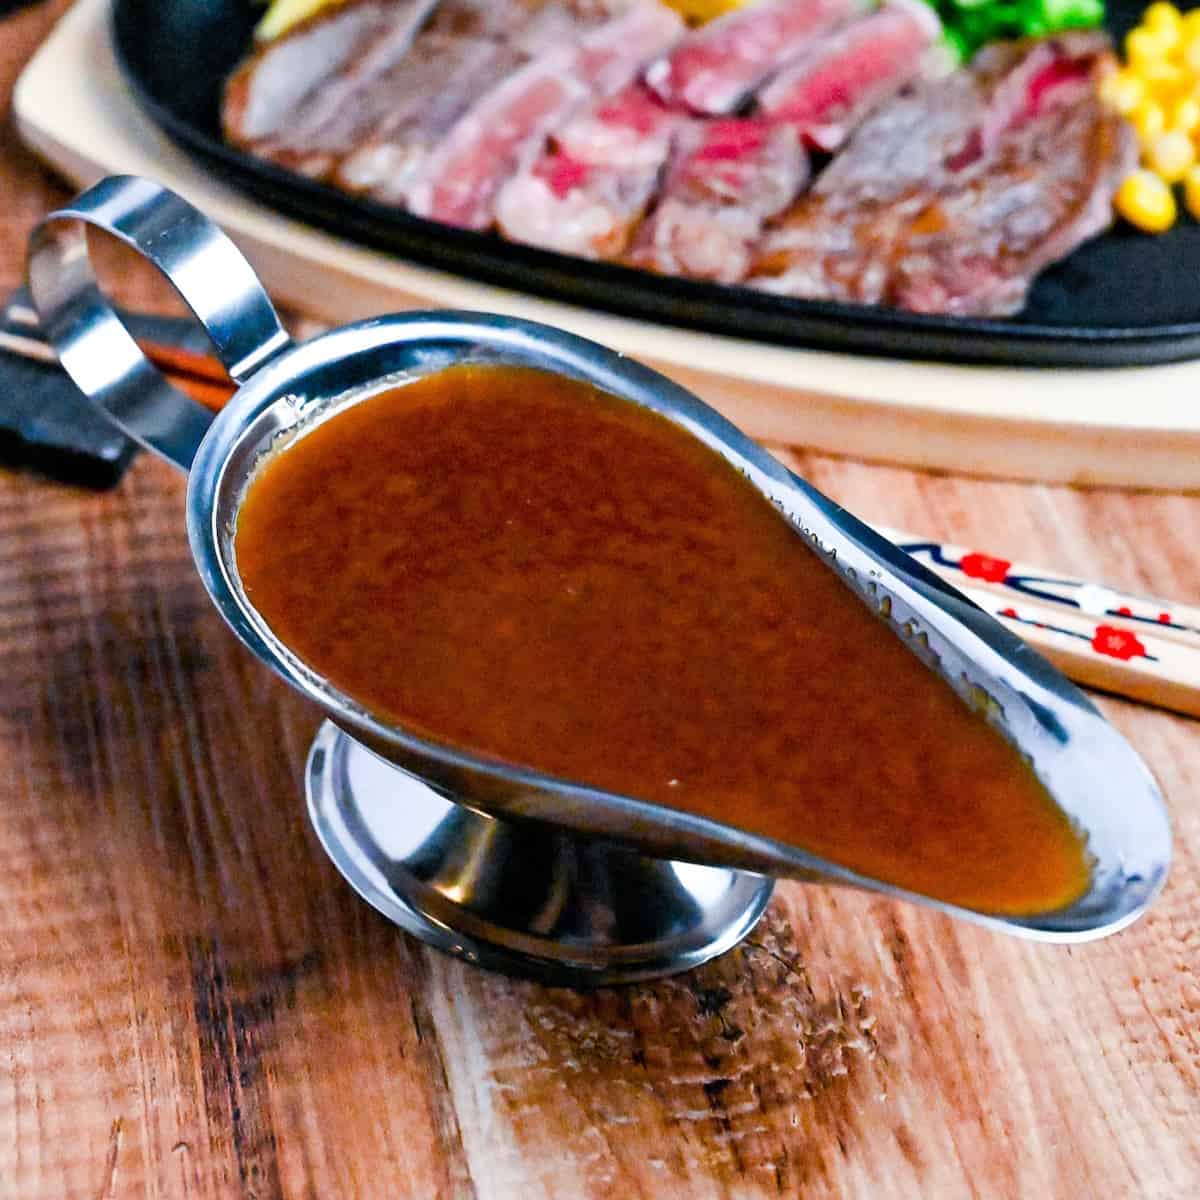 Japanese steakhouse style steak sauce in a steel gravy boat with slices of rare beef in the background